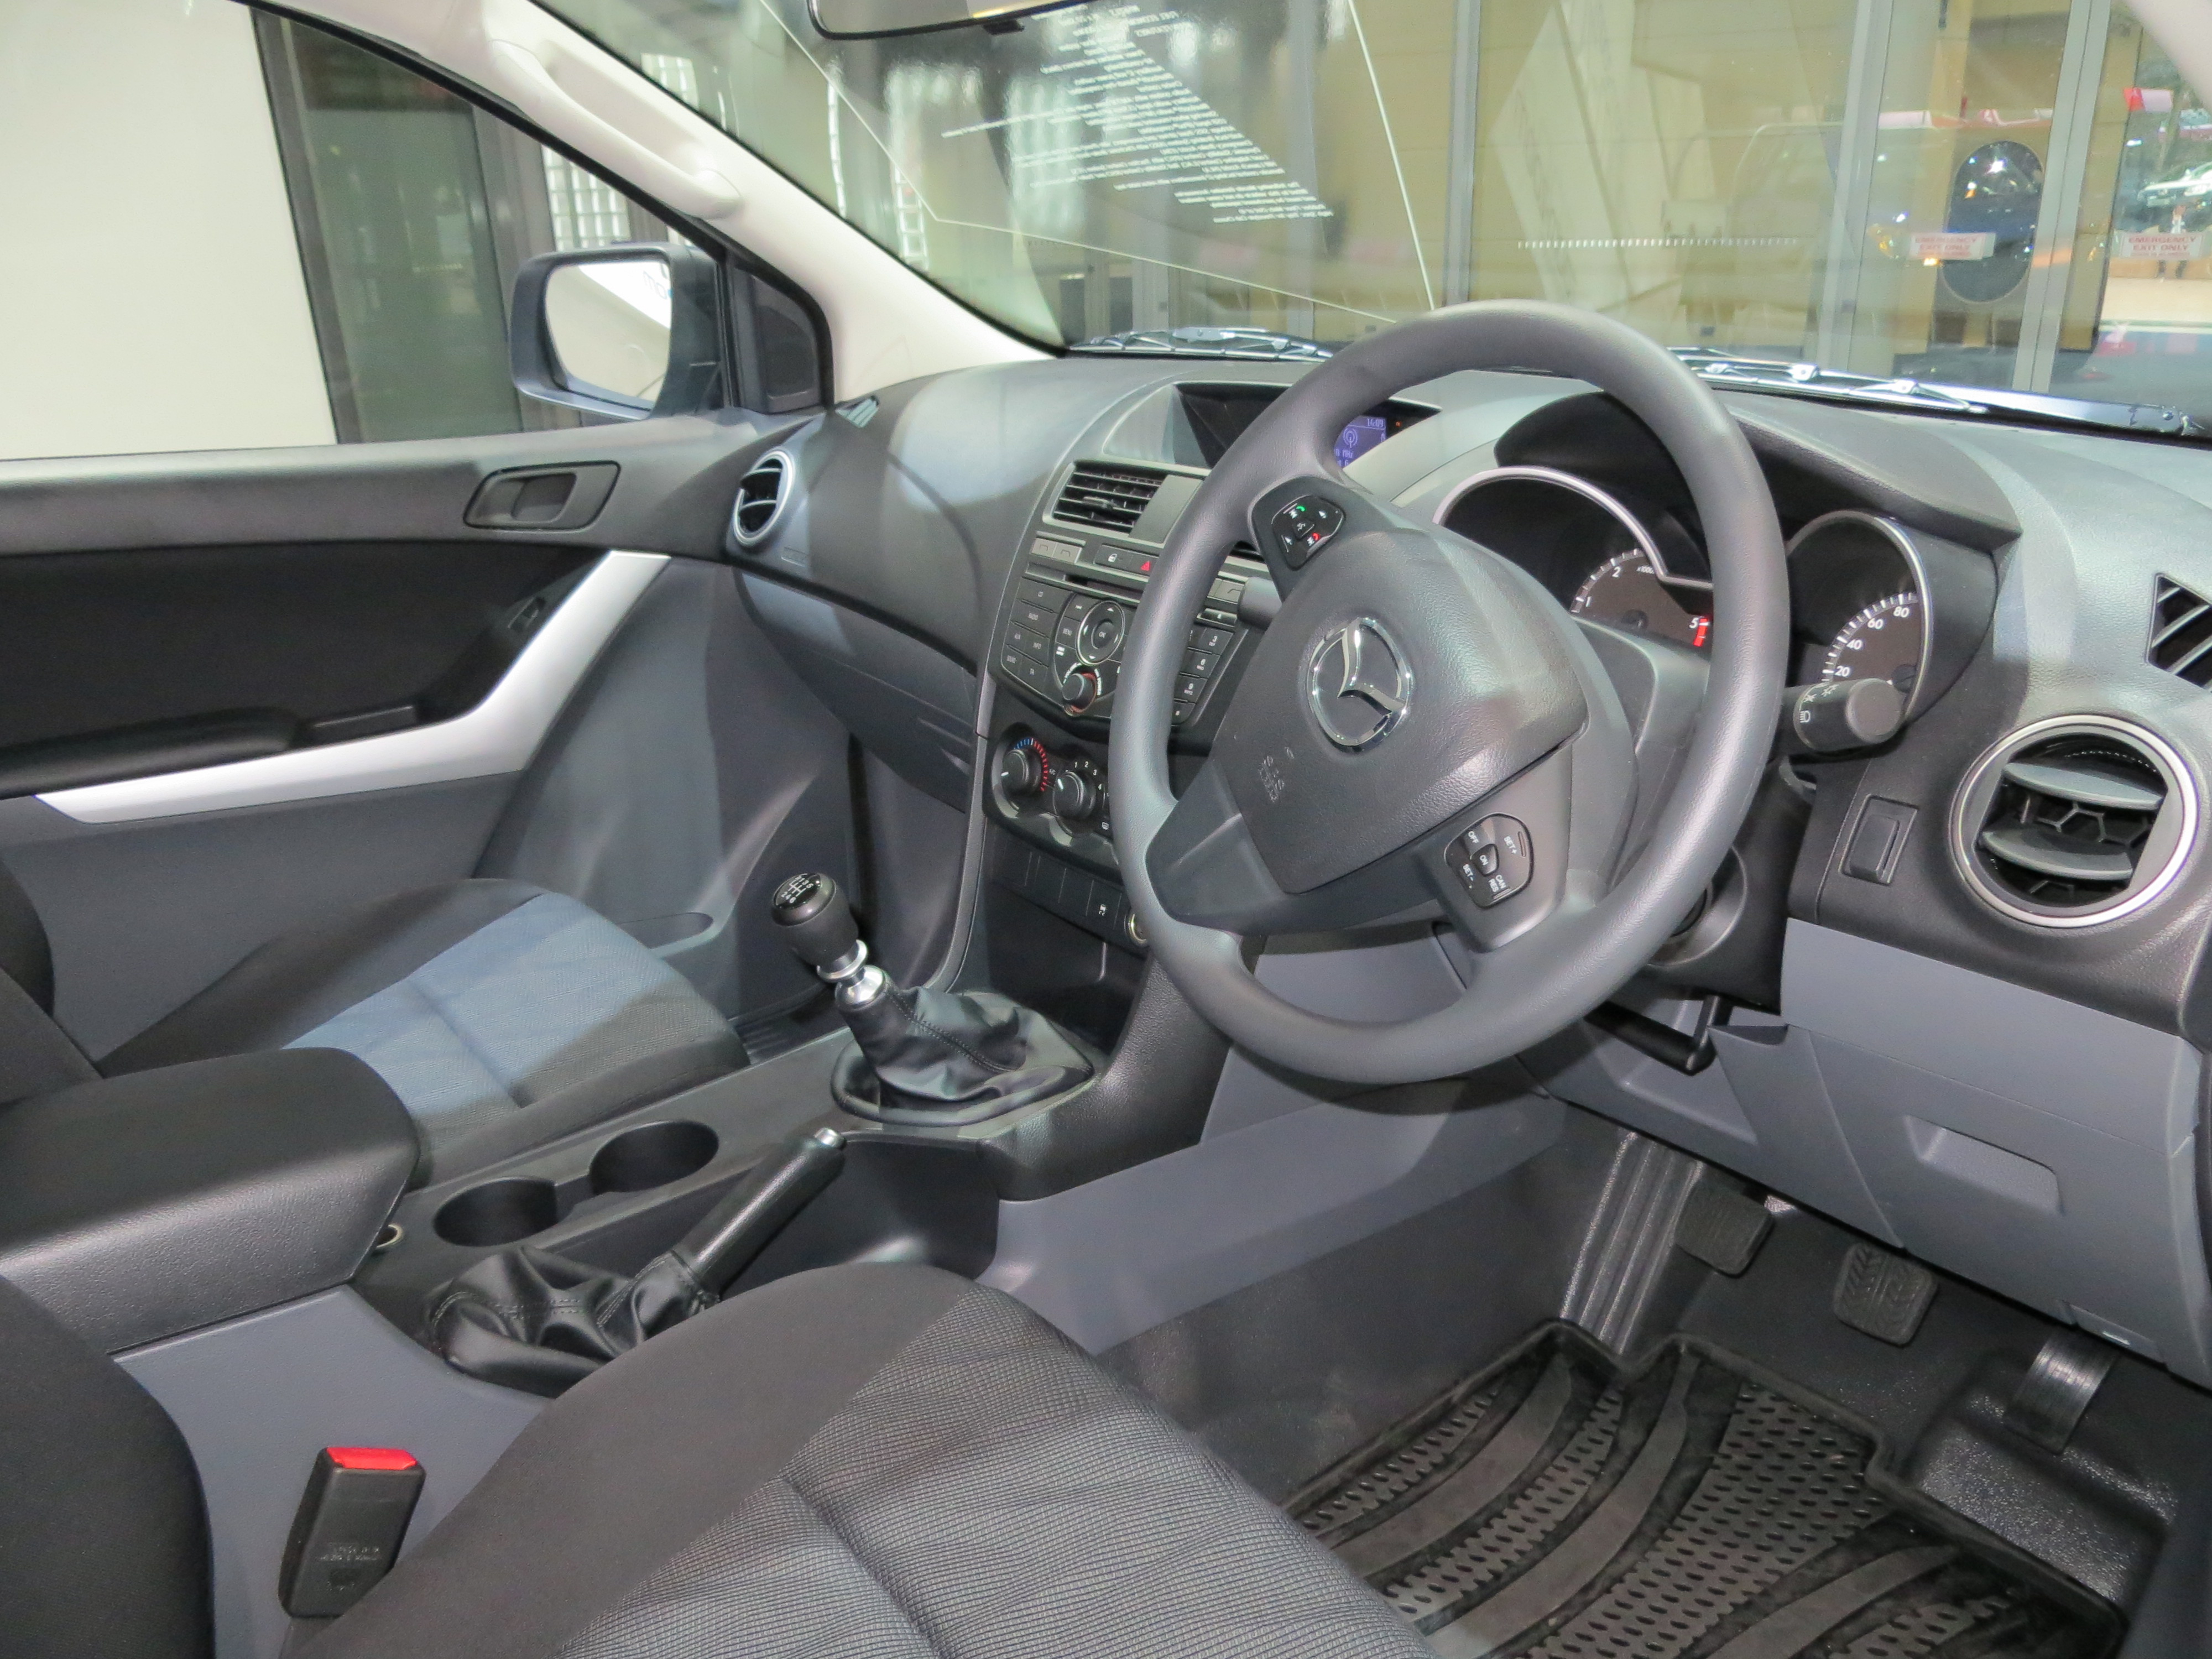 Mazda BT-50 Freestyle Cab modern specifications